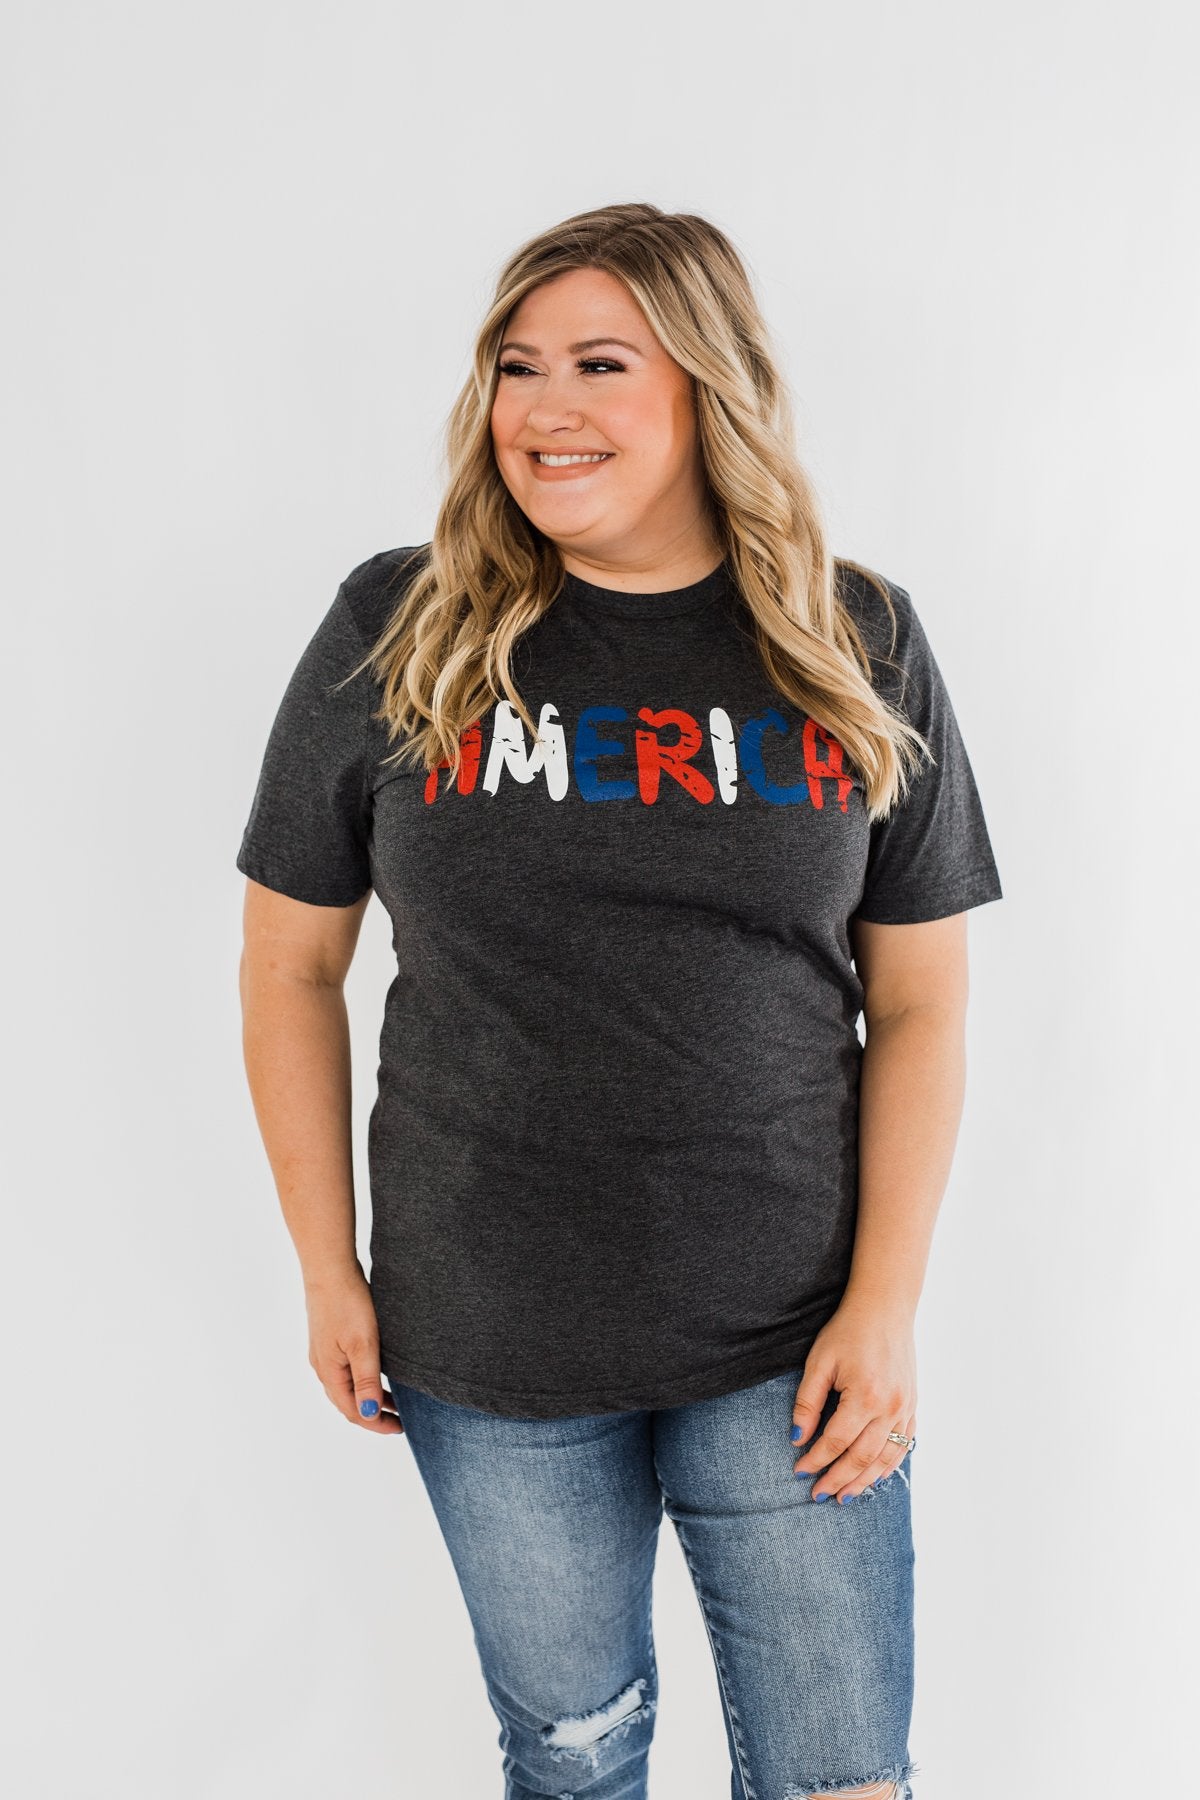 "America" Colorful Graphic Tee- Charcoal